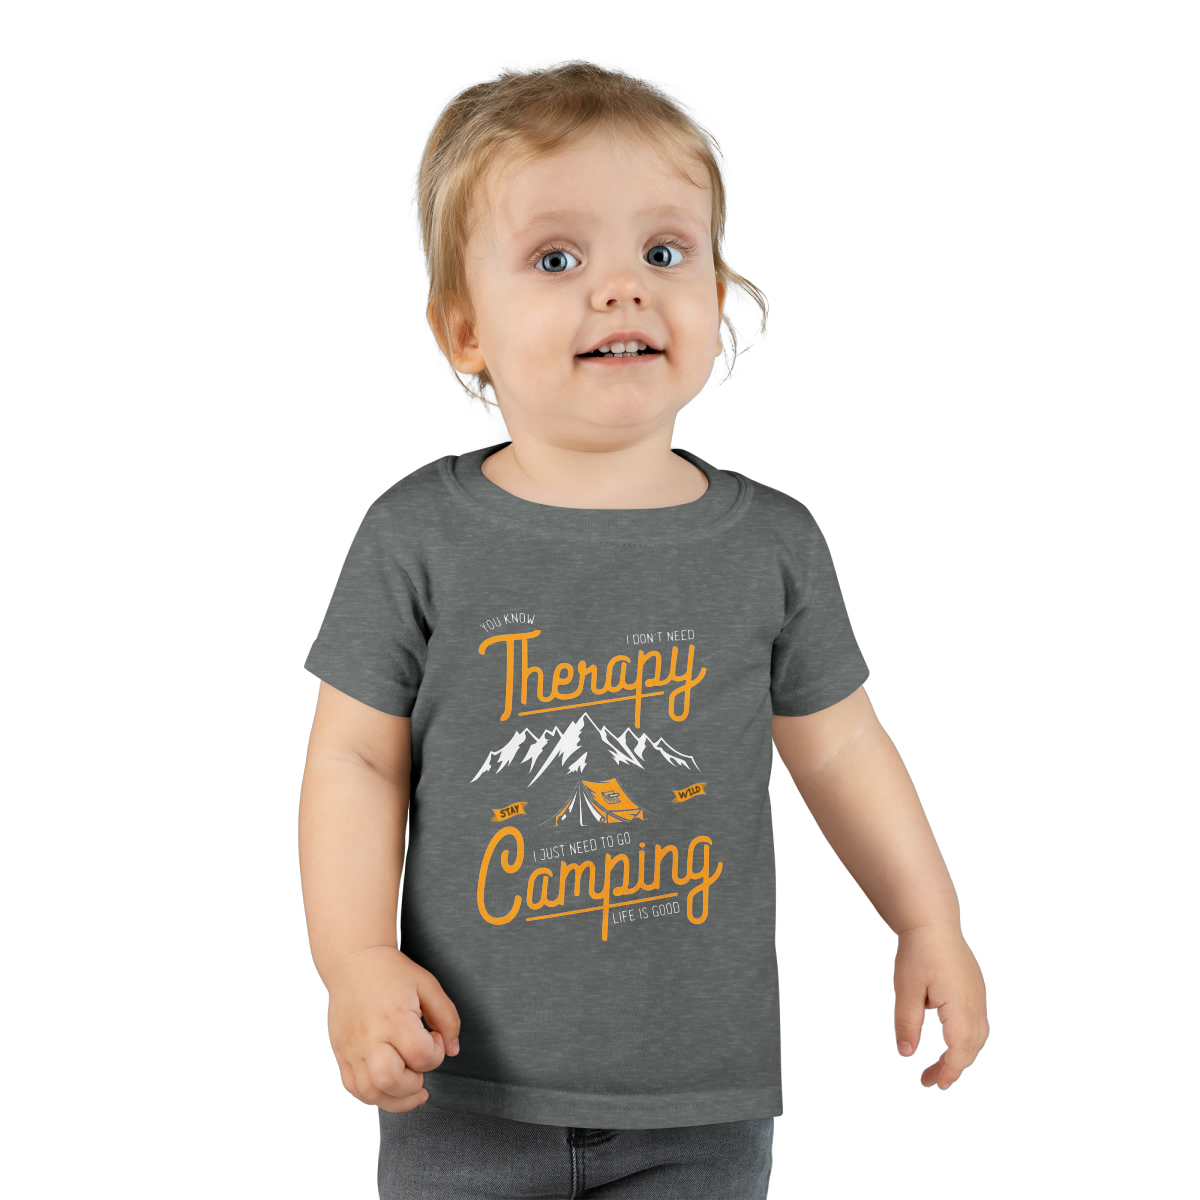 Toddler T-shirt "You know... I don't need therapy I just need to go camping. Sta - $16.48